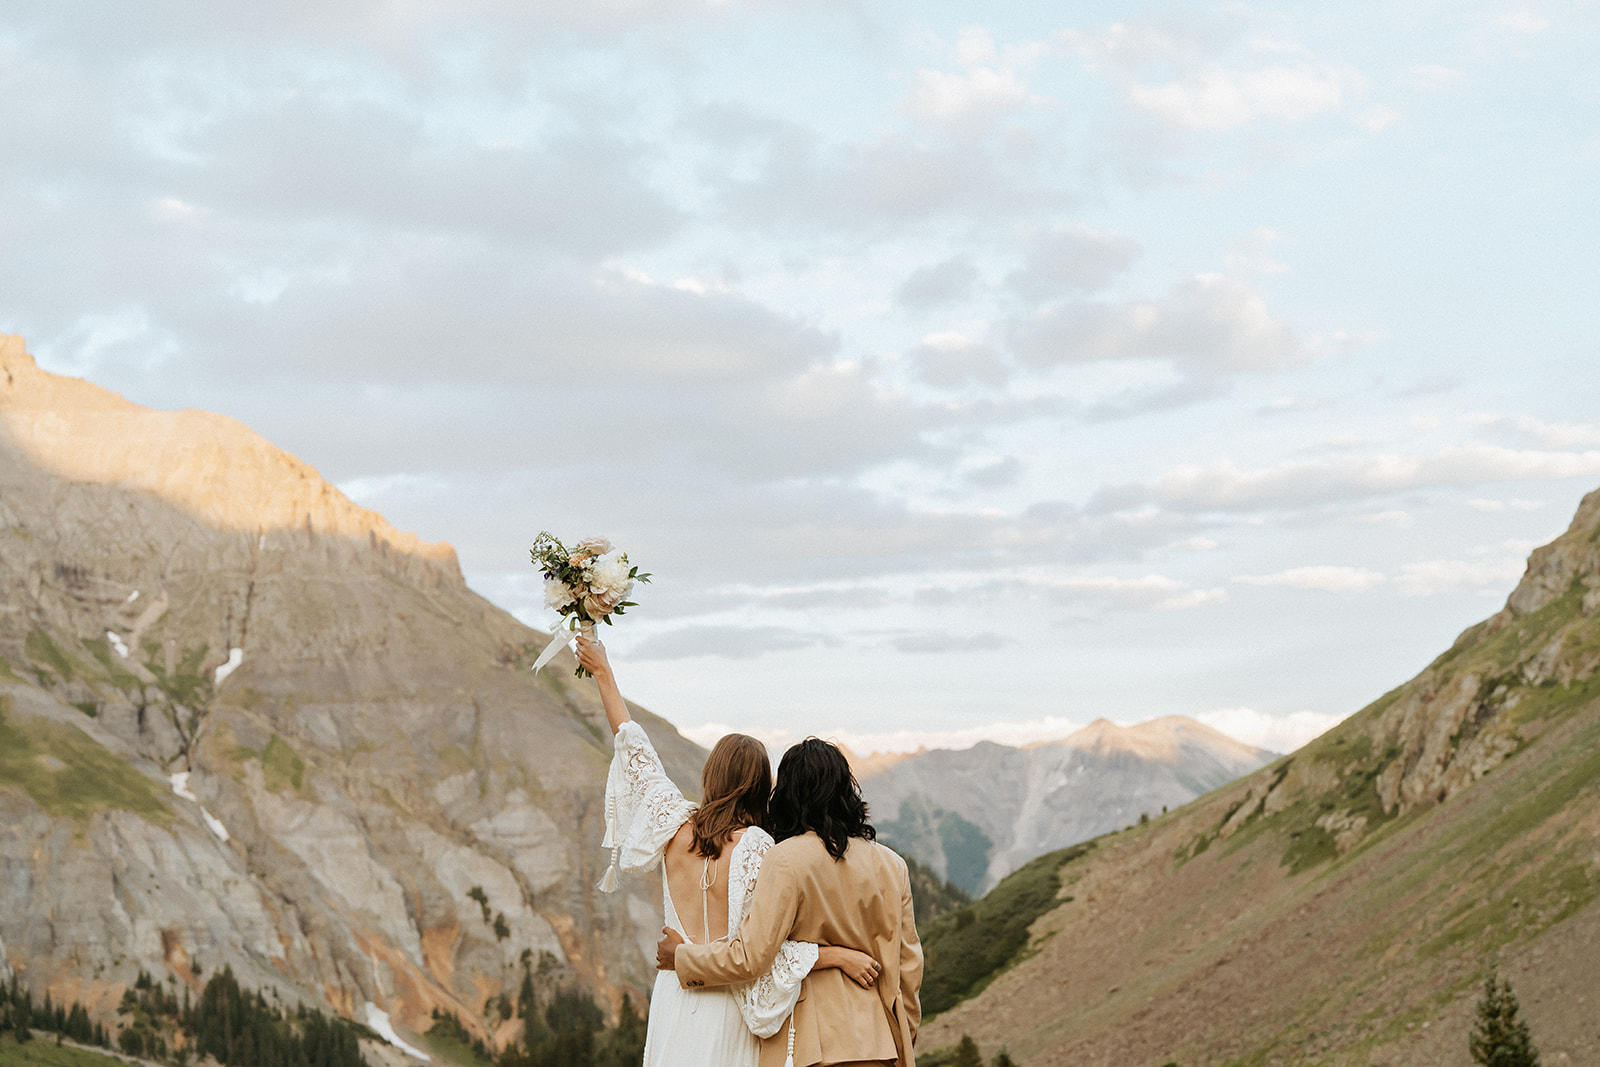 Newlyweds stand on the edge of a mountain while the bride holds up her bouquet overlooking a large valley